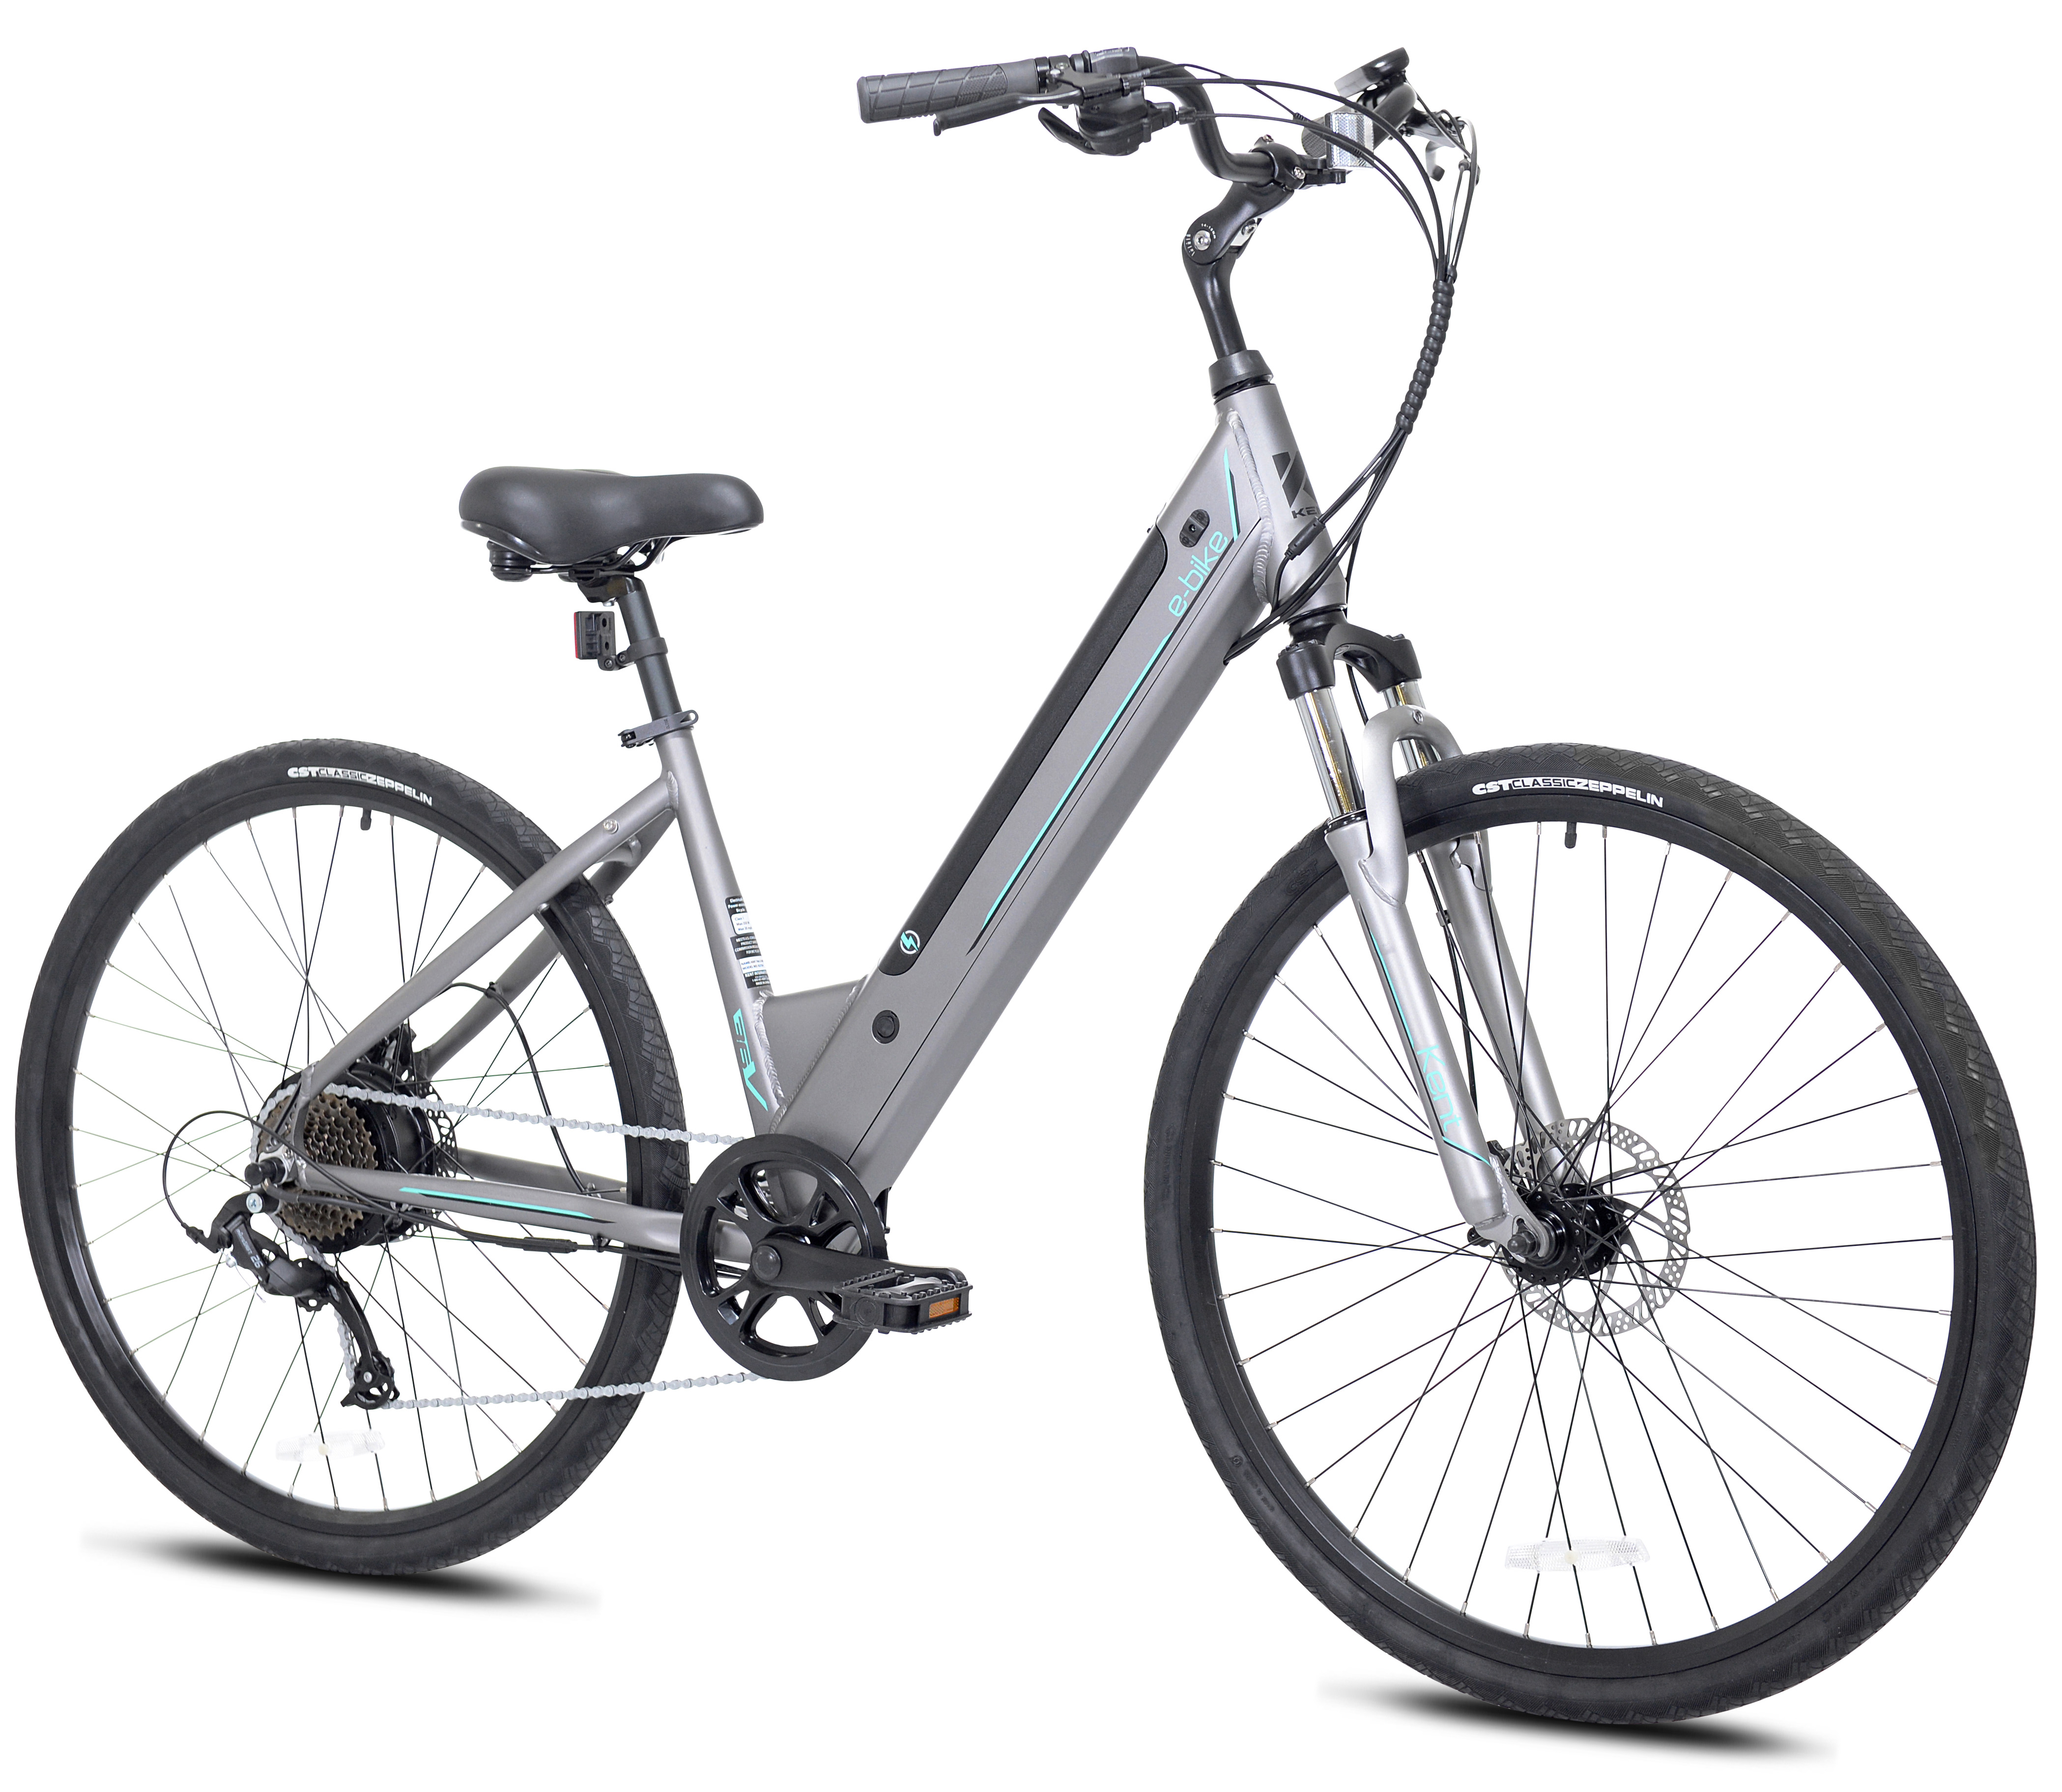 Kent Bicycles 700C 350W Adult Pedal Assist Step-Through Comfort Electric Bicycle, Gray - image 1 of 13